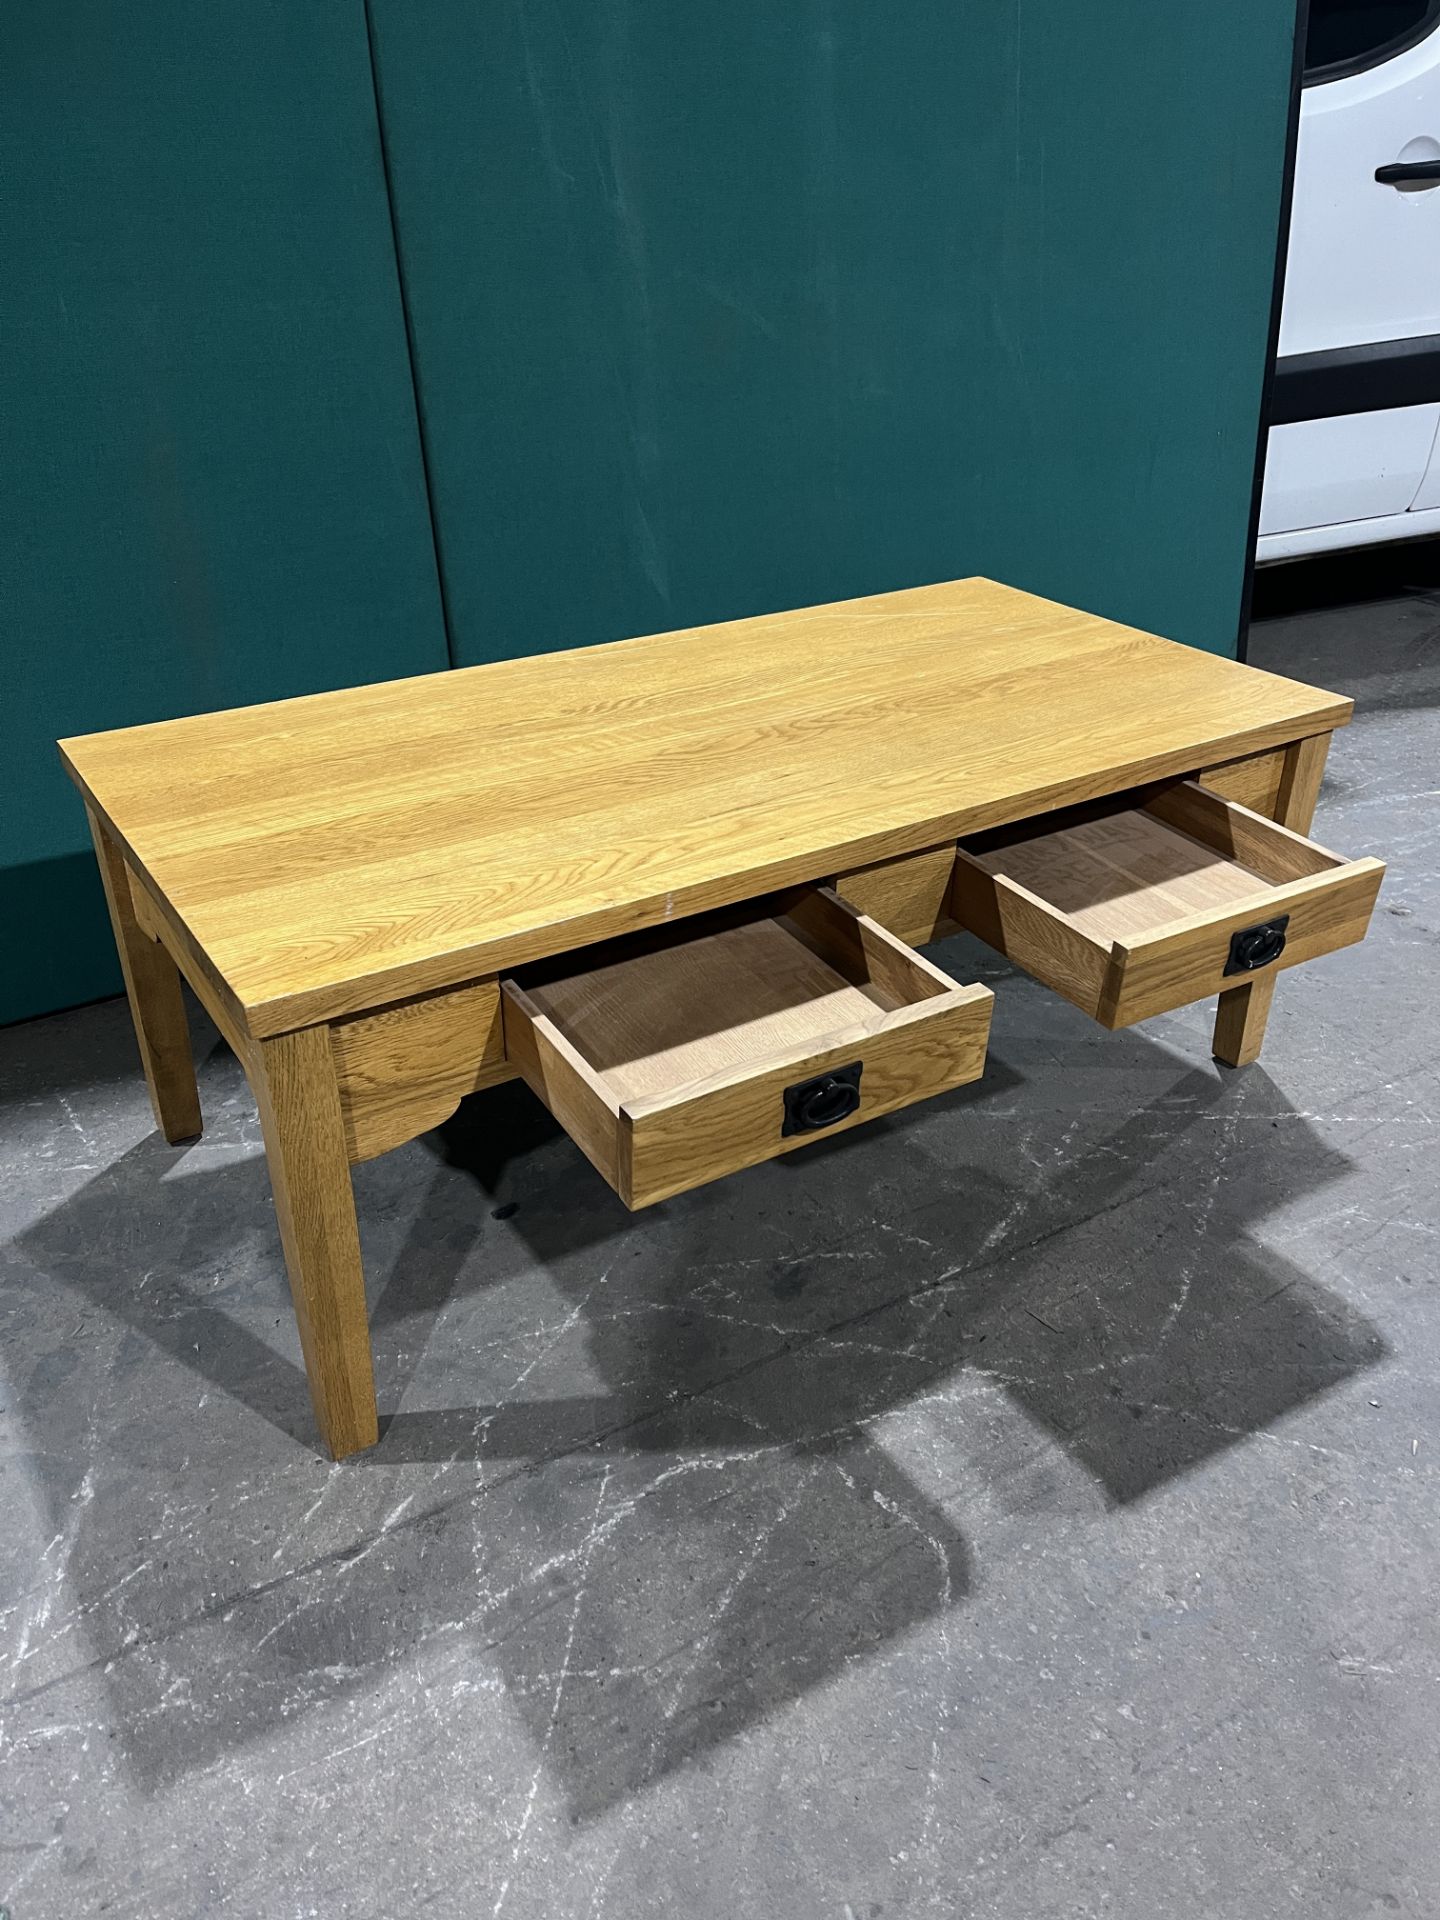 Oak Coffee Table w 2 Drawers - Image 3 of 6